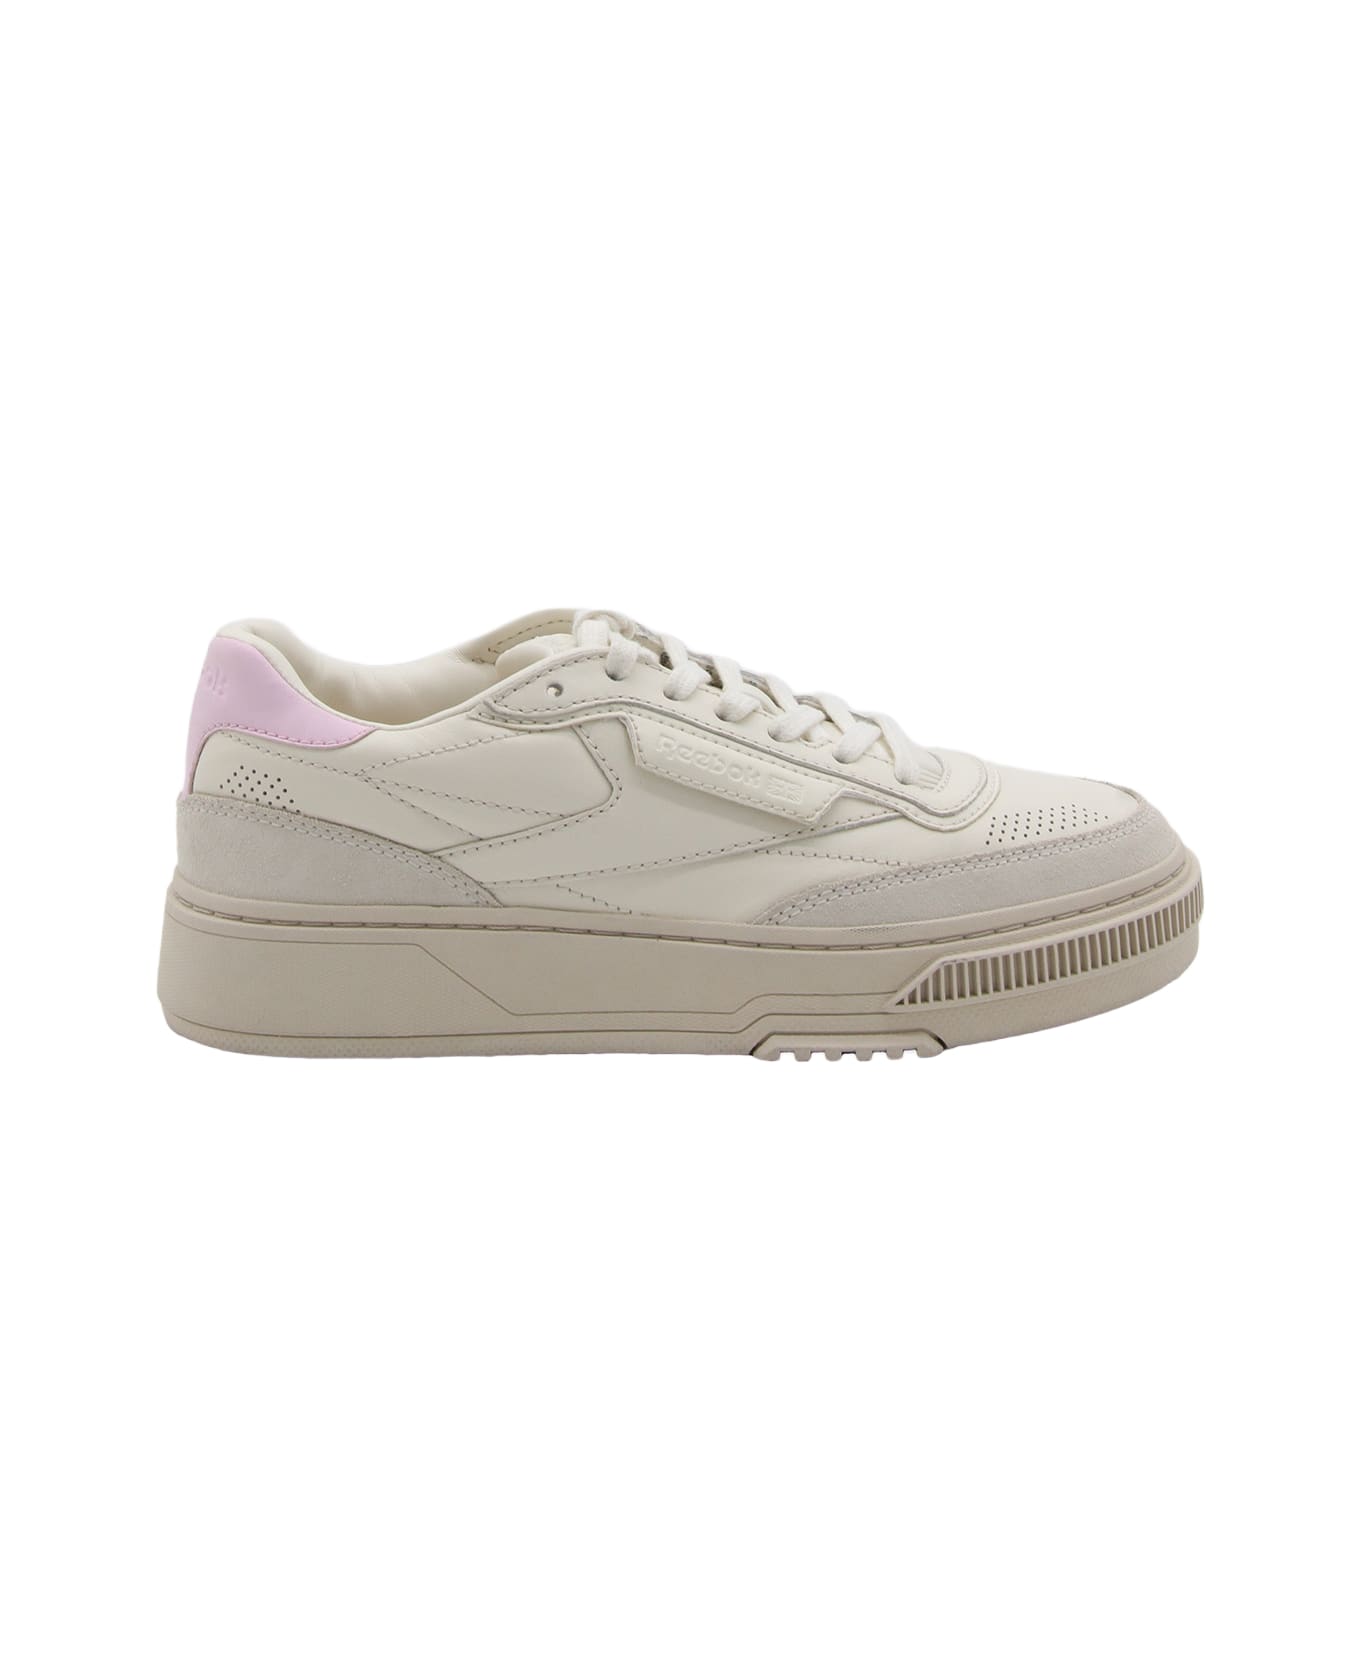 Reebok White And Pink Leather C Ltd Sneakers - White スニーカー